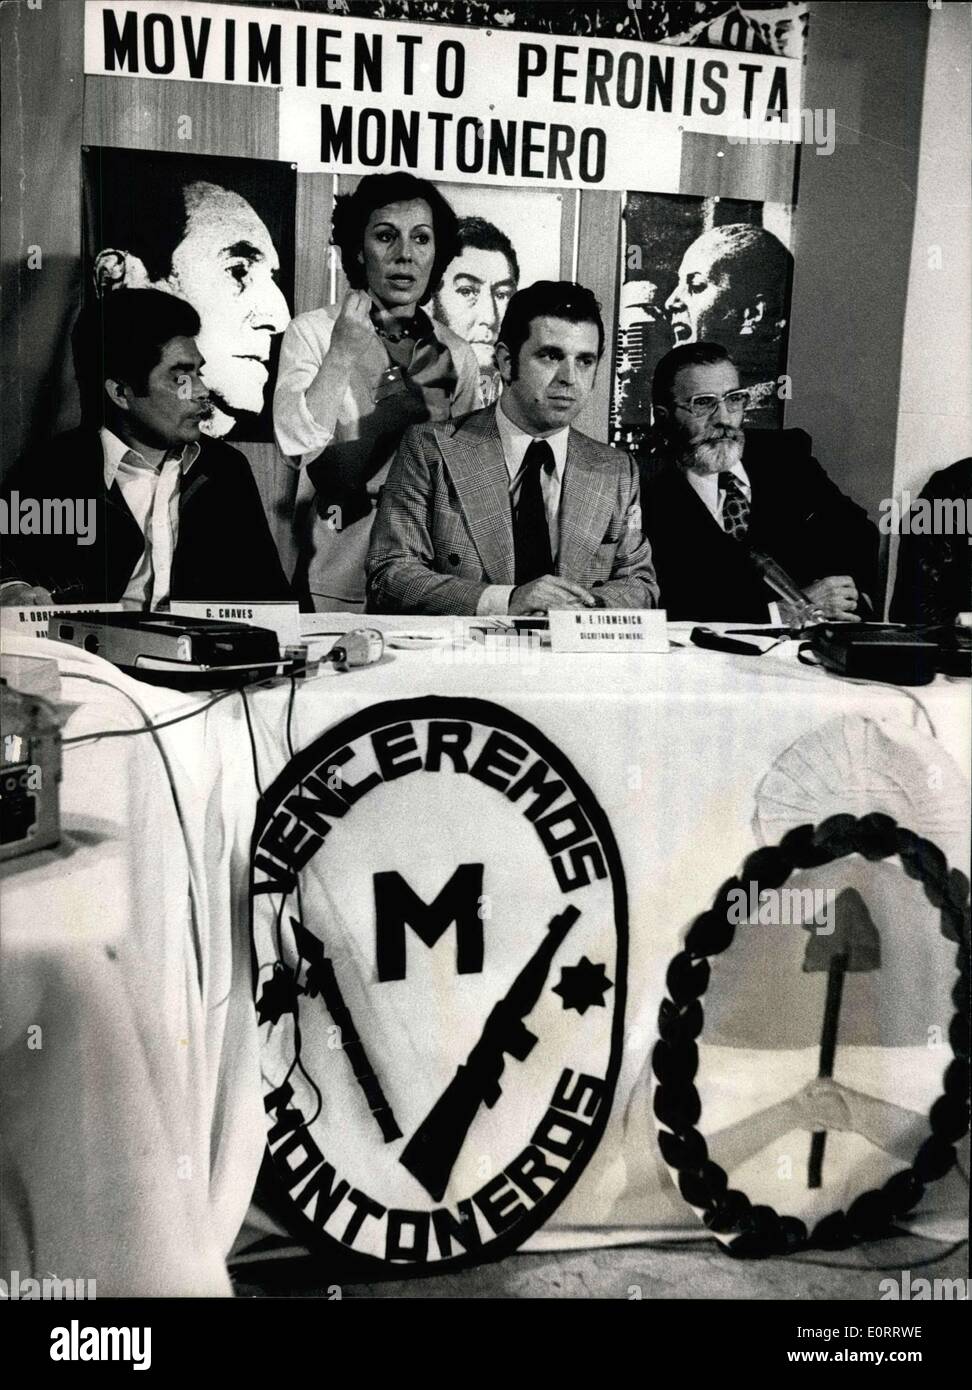 May 08, 1960 - Leaders Of The ''Argentina Montoneros'' Hold Press Conference In Rome: The leaders of the 'Argentina Montenerses' Marie Firmenich, held a press conference in Tome. accompained by many aspenents of the Argentina resistance. He explained the program of the new premist movement that takes the names of 'Movimients Perensit Mentomere' the will result by the union of the guerilla with the polieticial movement of the Authentic Party, experenist of the left. Photo Shows Mario Firmenicr, center during his press conference in Rome Stock Photo